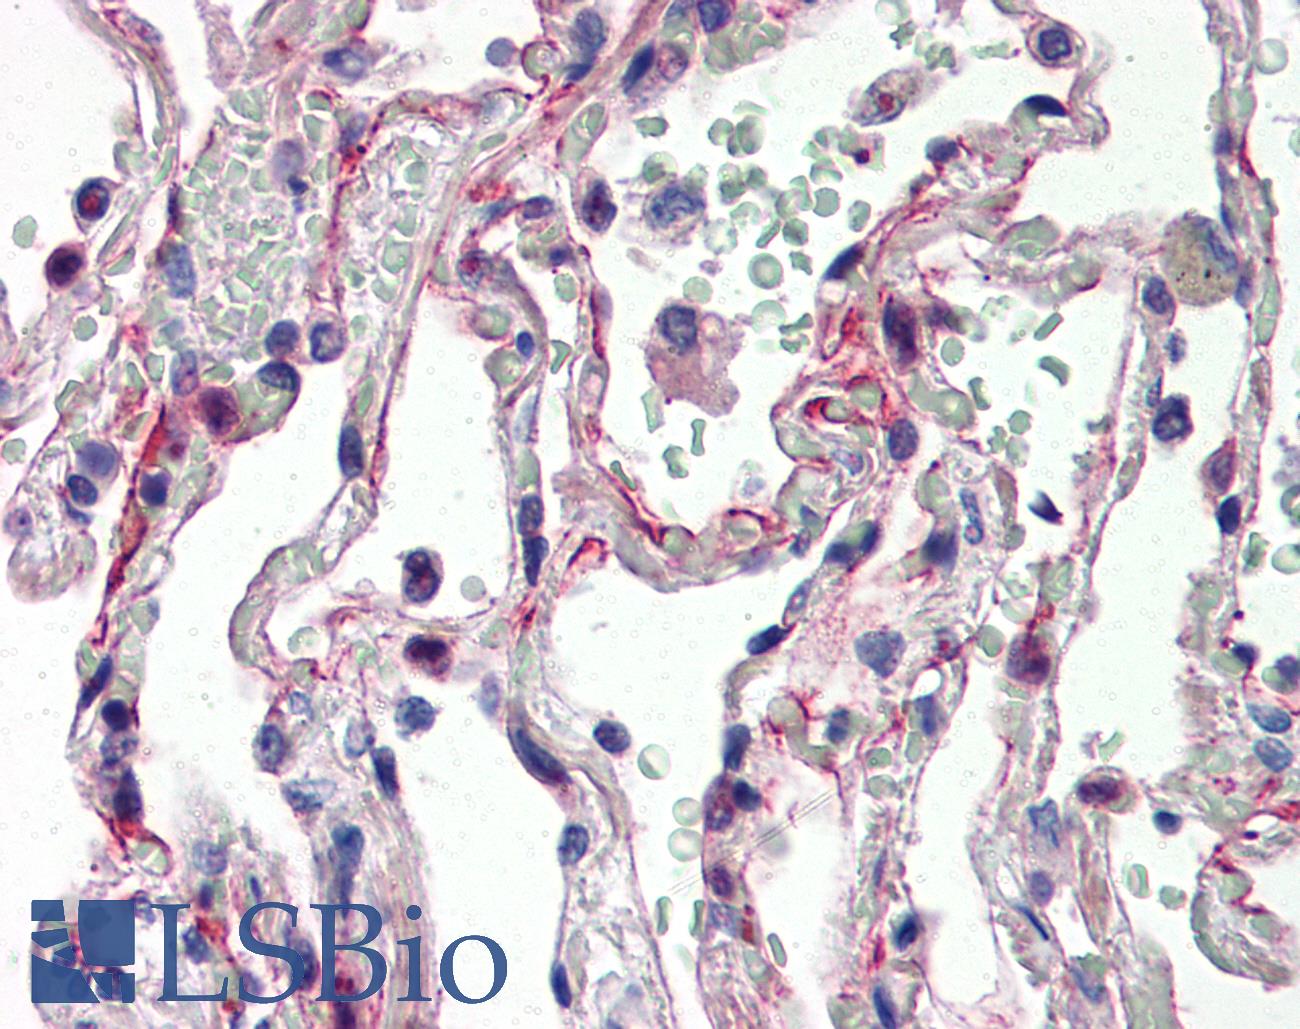 IL27 Antibody - Anti-IL-27 antibody IHC of human lung. Immunohistochemistry of formalin-fixed, paraffin-embedded tissue after heat-induced antigen retrieval. Antibody concentration 5 ug/ml.